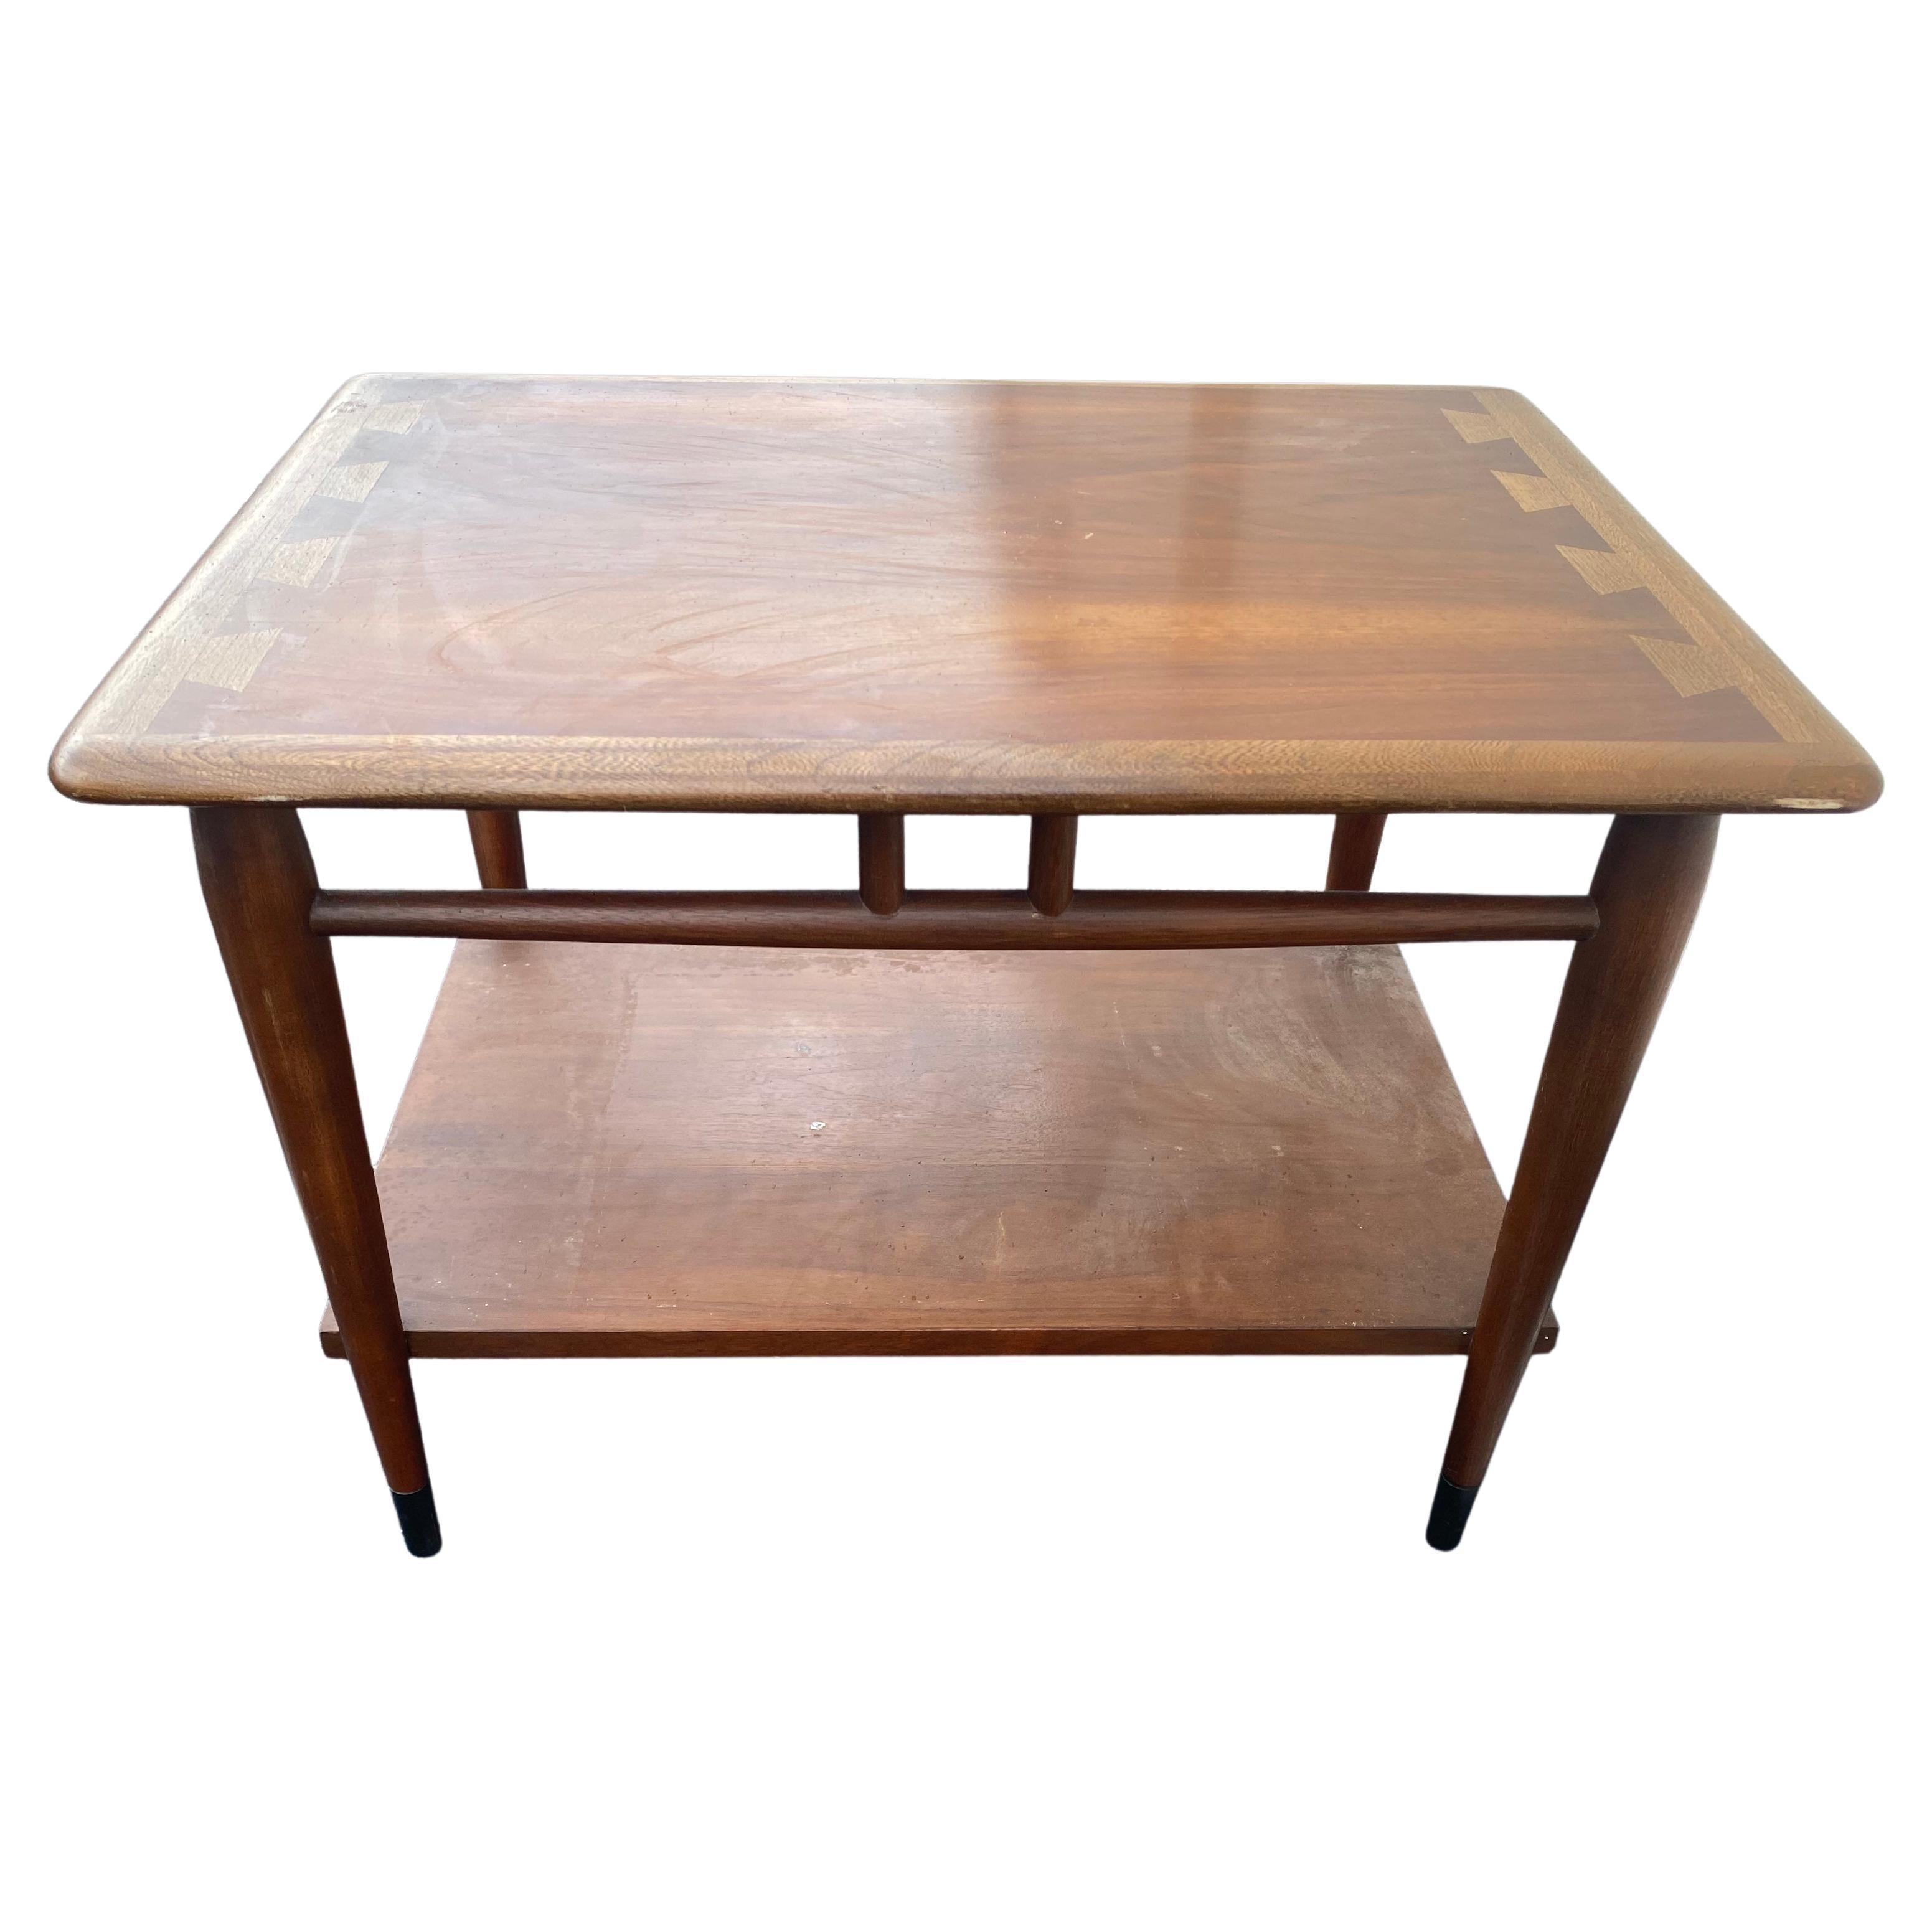 Mid-century walnut side table by Lane, Acclaim. Walnut side table by Lane Furniture, part of the Acclaim line designed by Andre Bus showcasing his iconic two-tone wood dovetail, using walnut and fruit woods. Beautiful wood tone and black metal